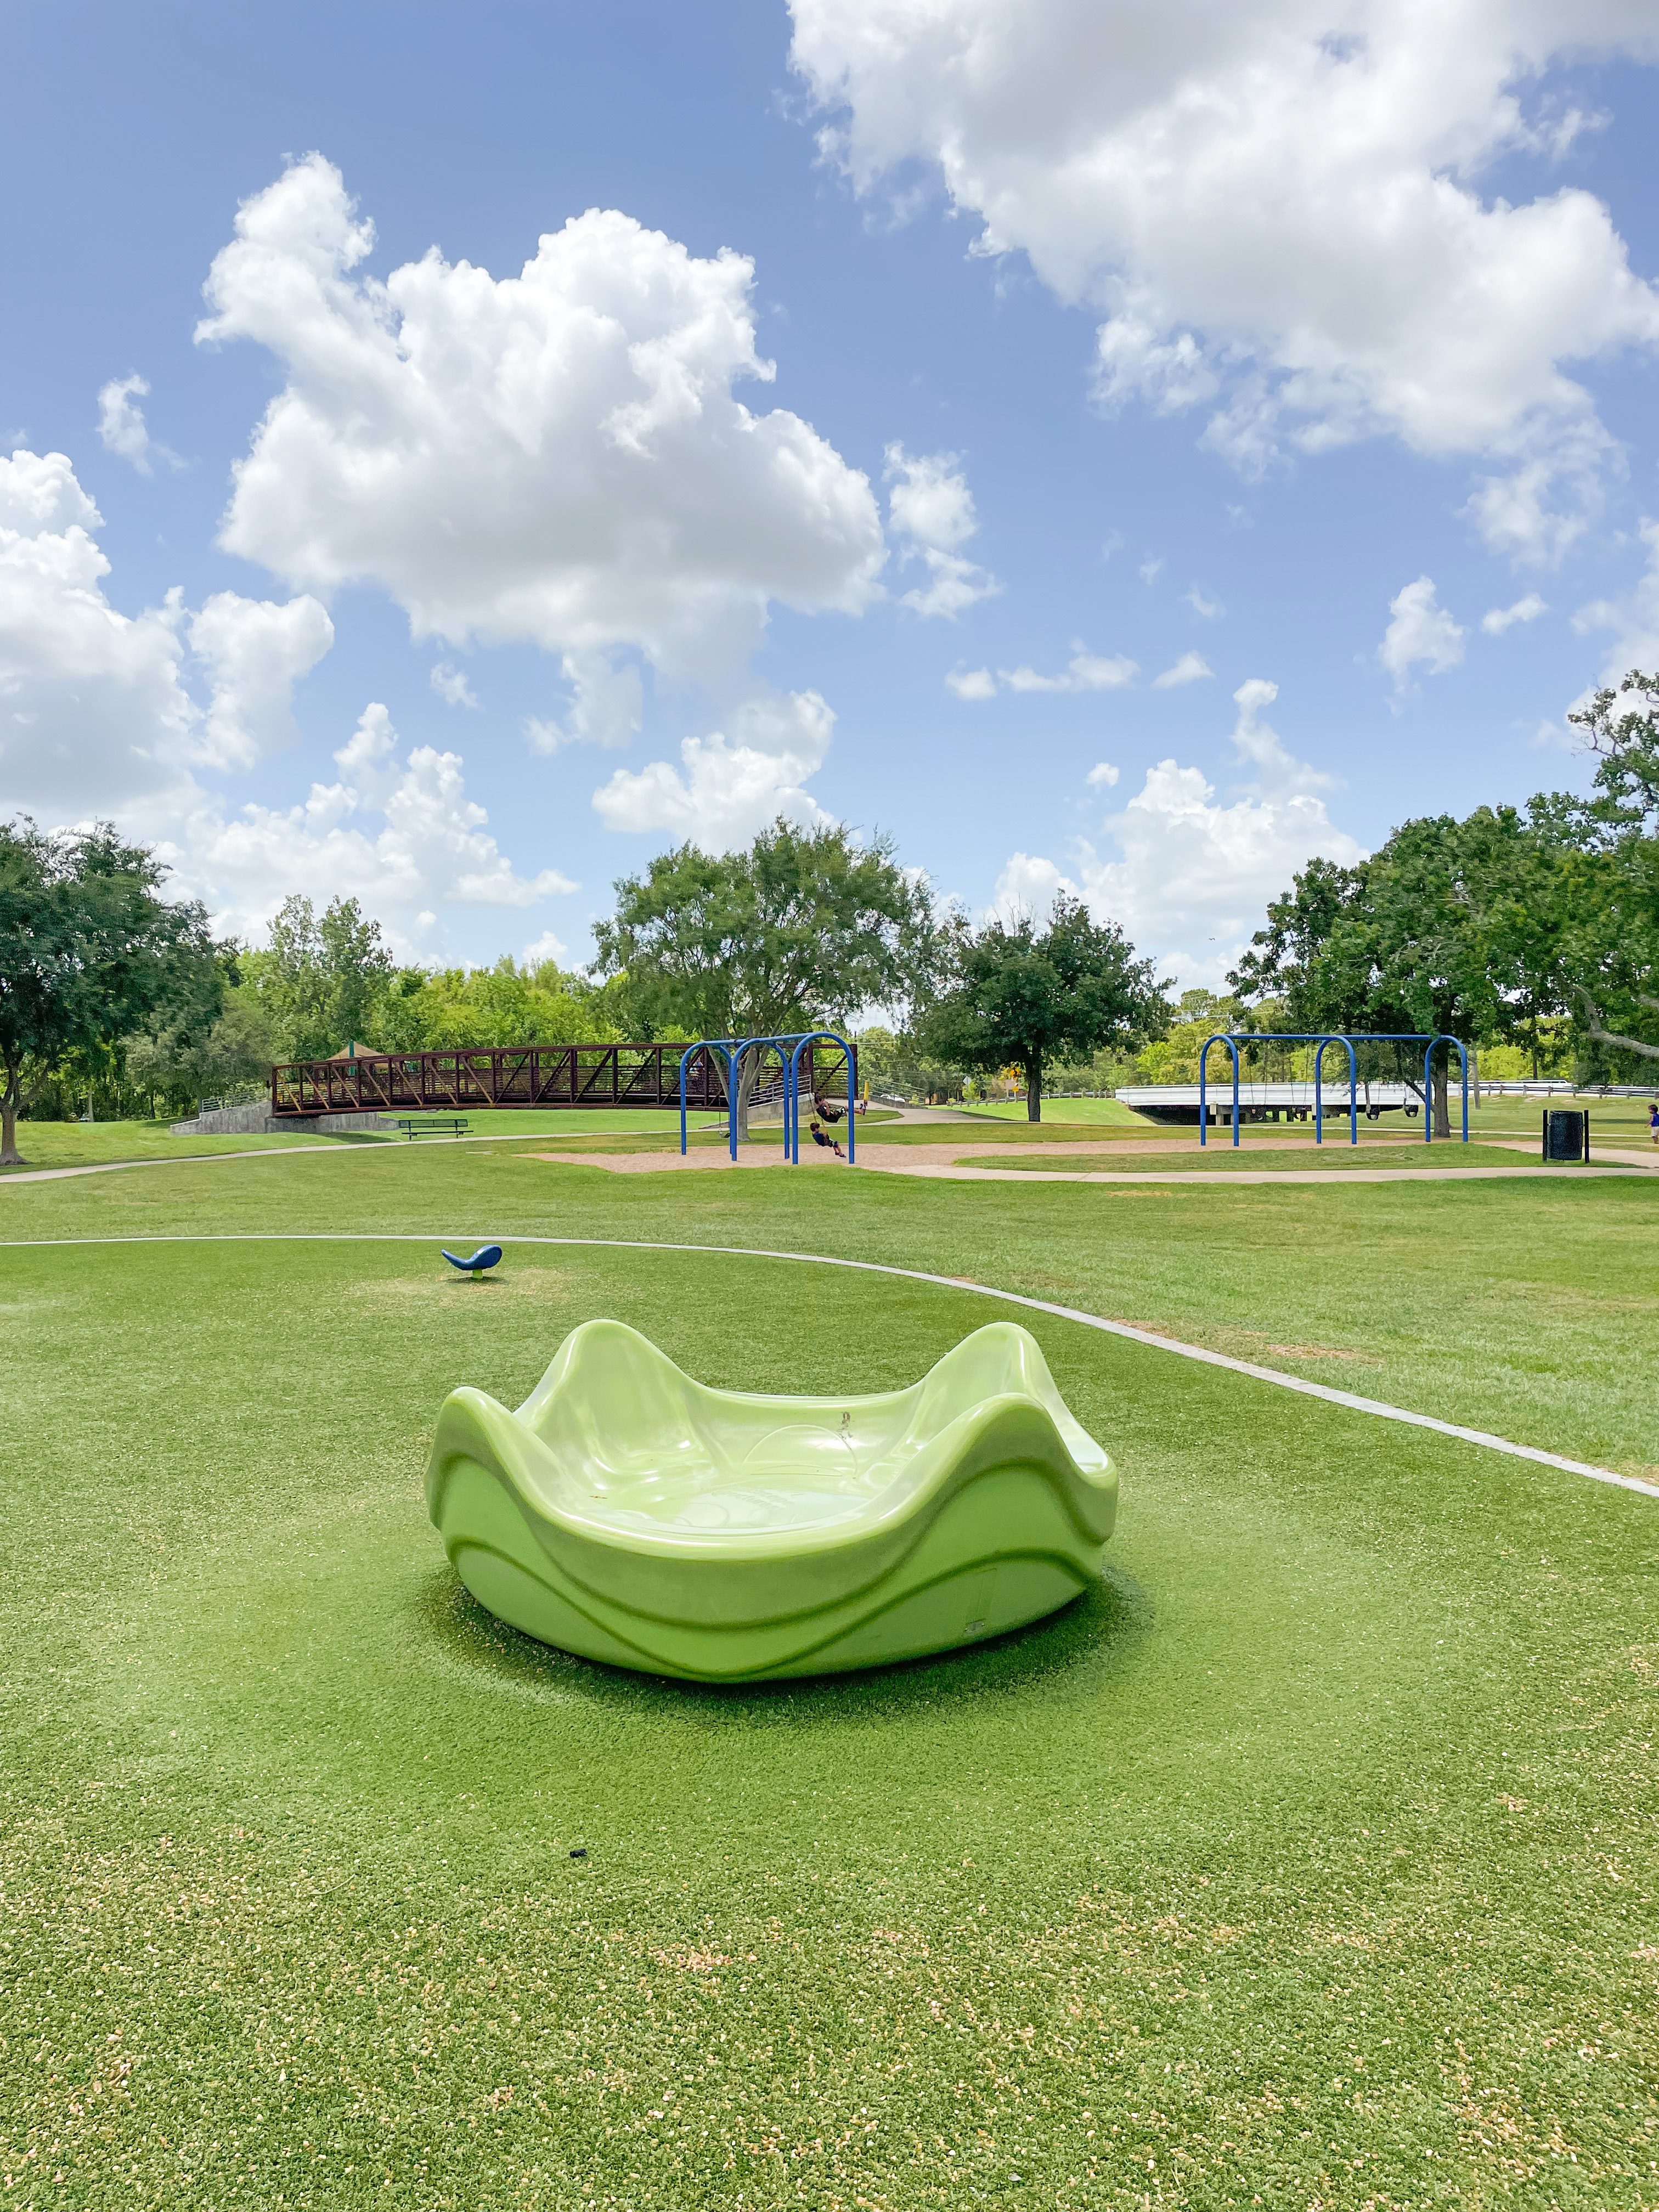 Playground at Centennial Park, Pearland